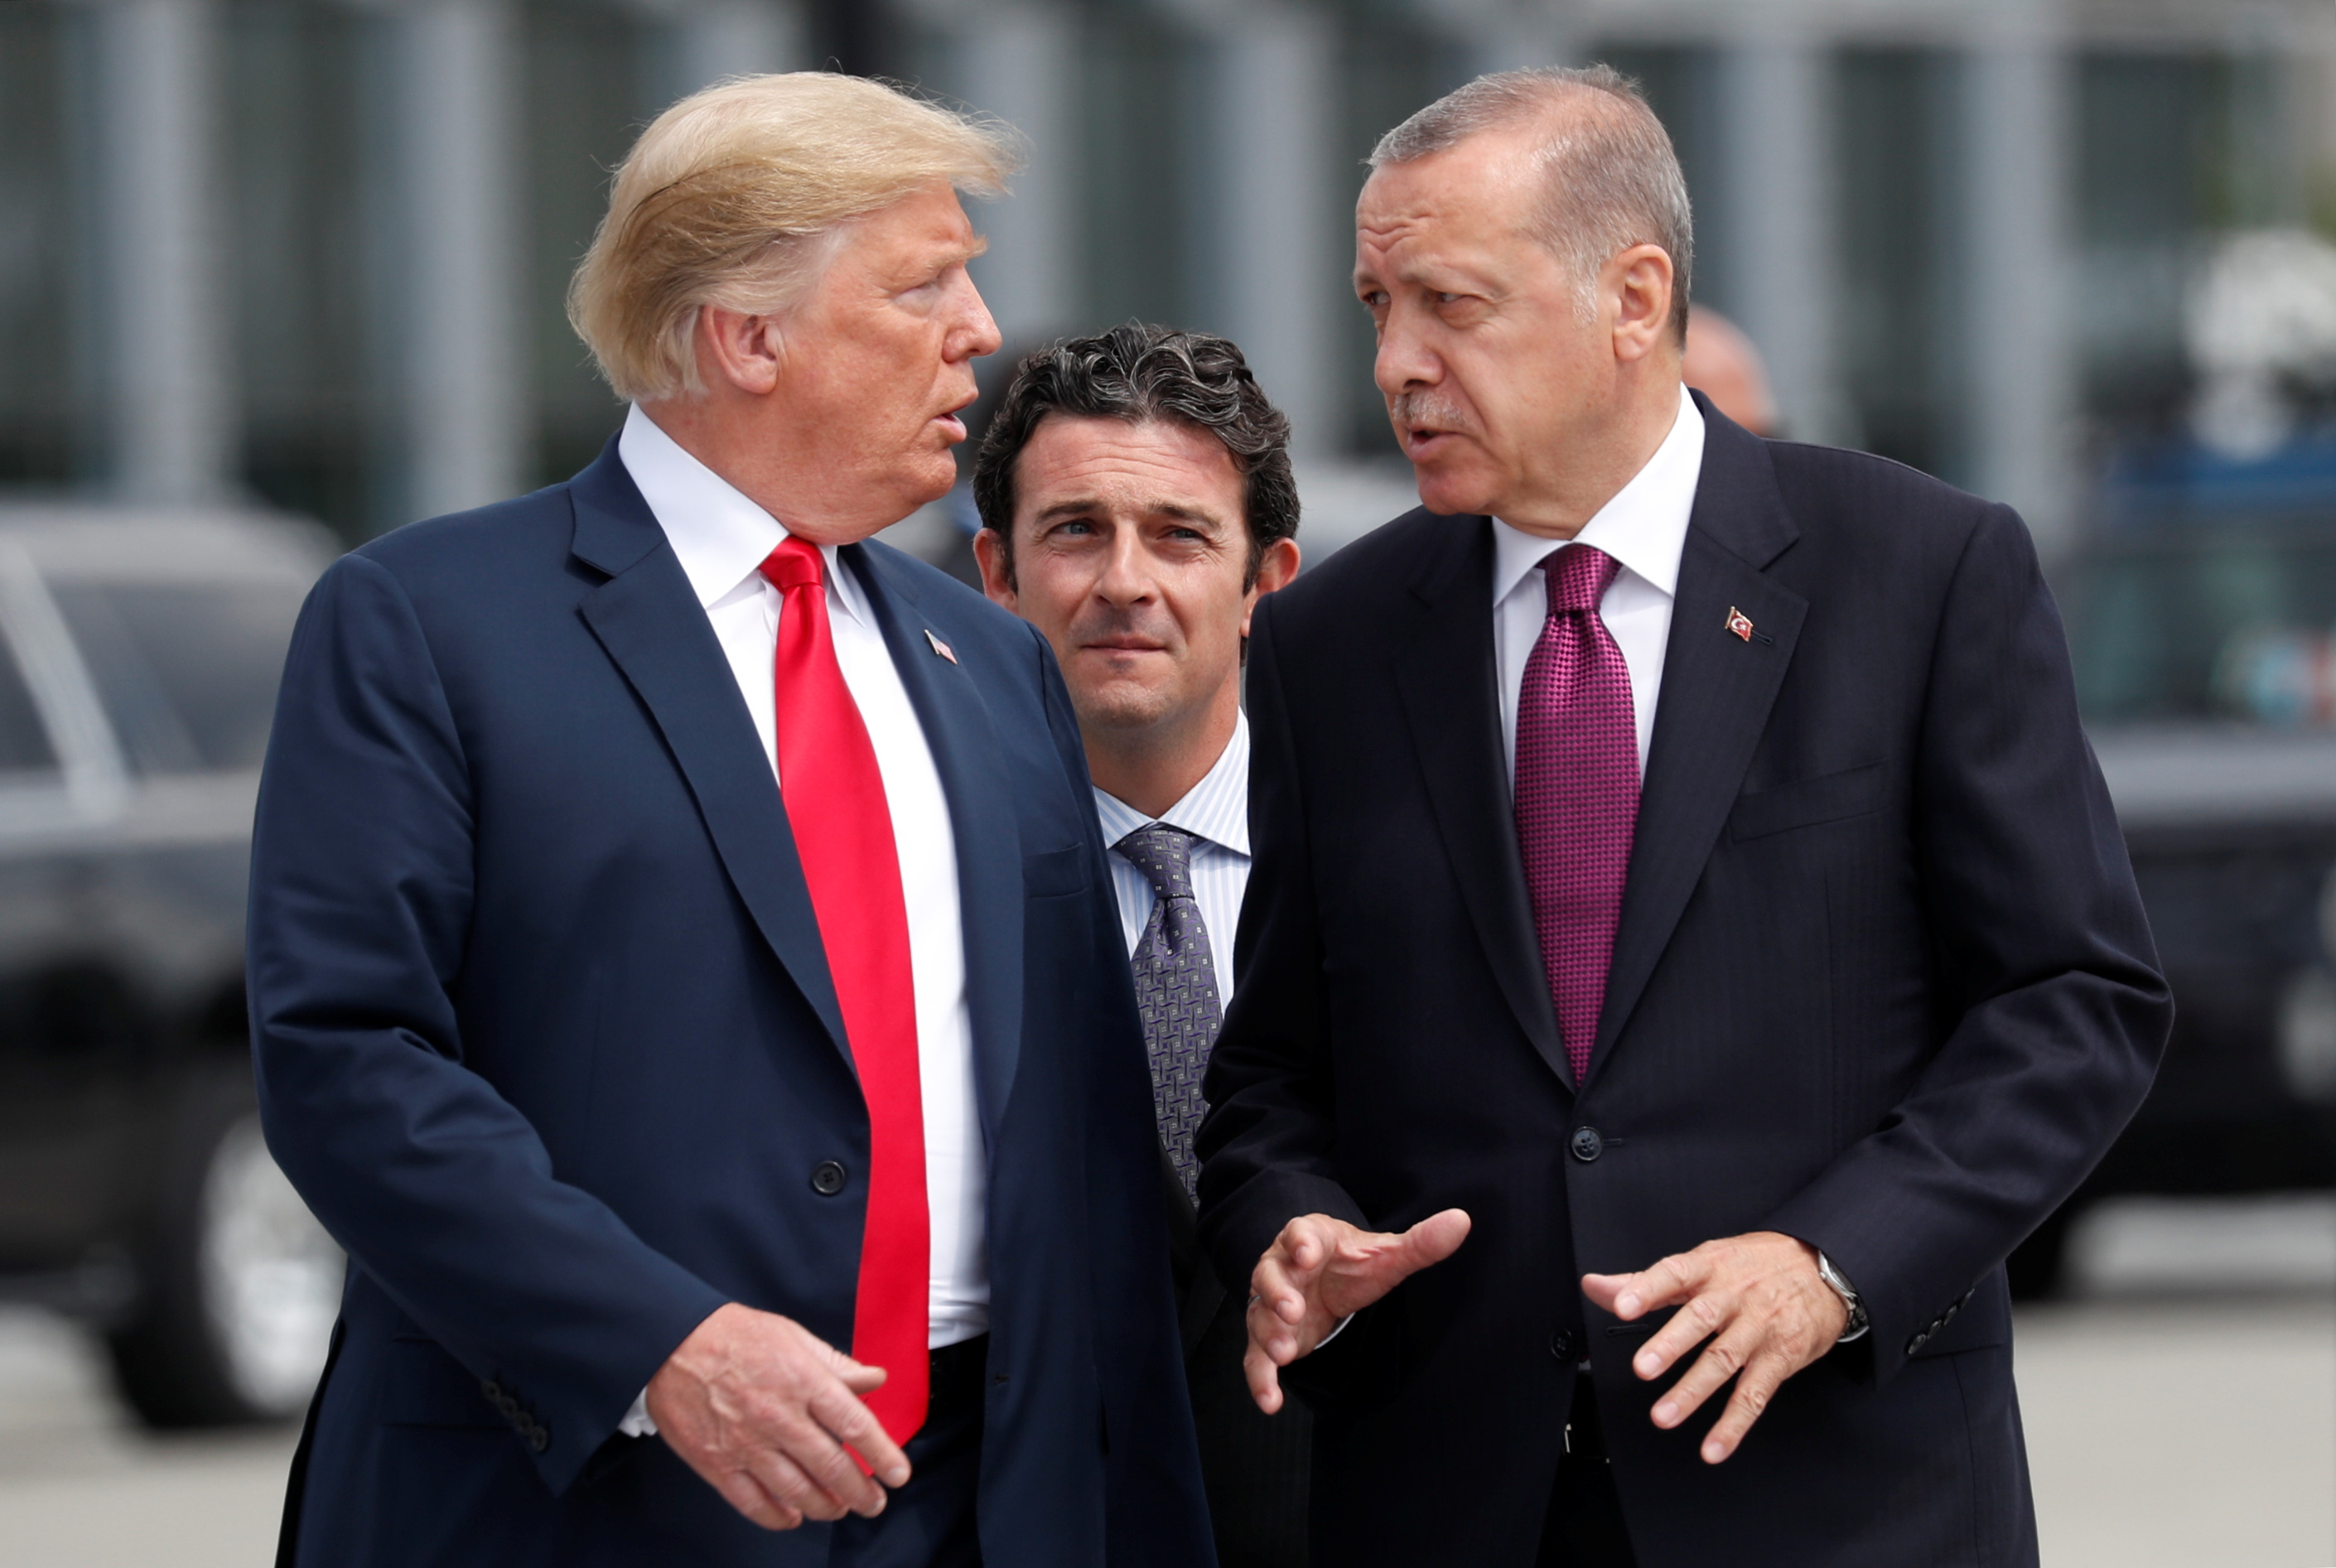 U.S. President Donald Trump and Turkish President Tayyip Erdogan gesture as they talk at the start of the NATO summit in Brussels, Belgium July 11, 2018. REUTERS/Kevin Lamarque